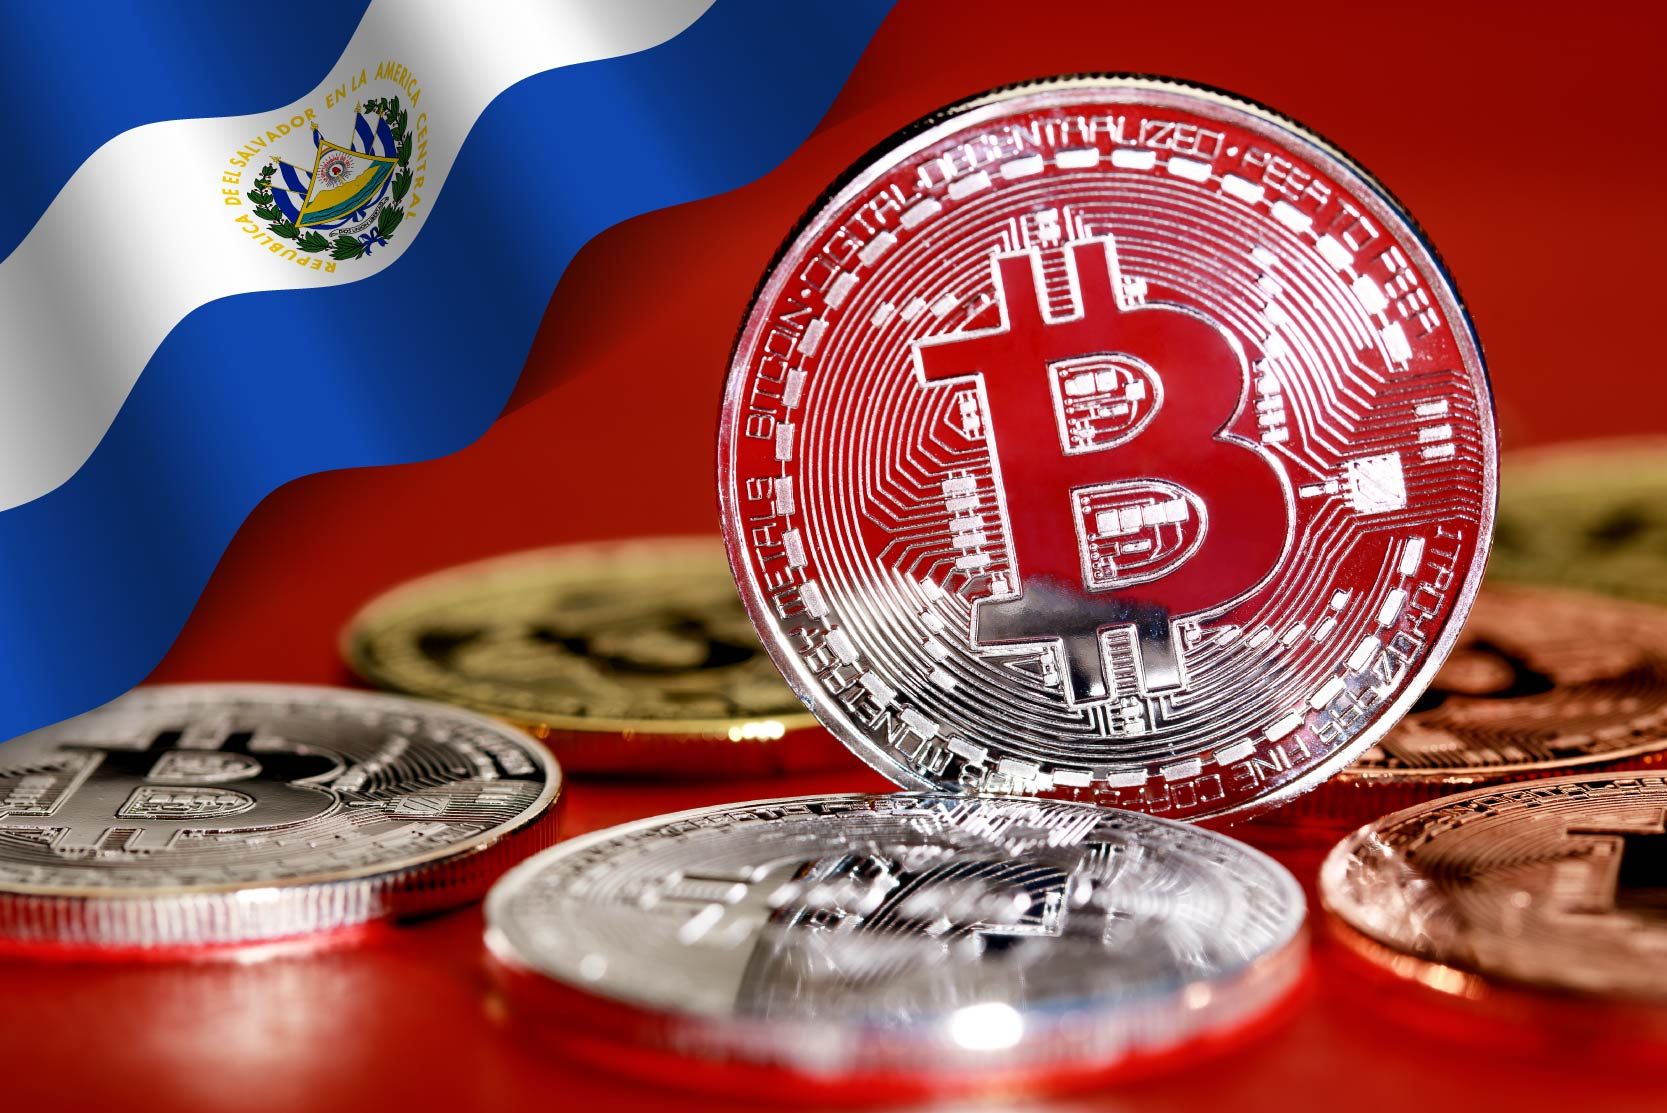 The Bitcoin market collapsed despite the fact that BTC has just become legal tender in El Salvador